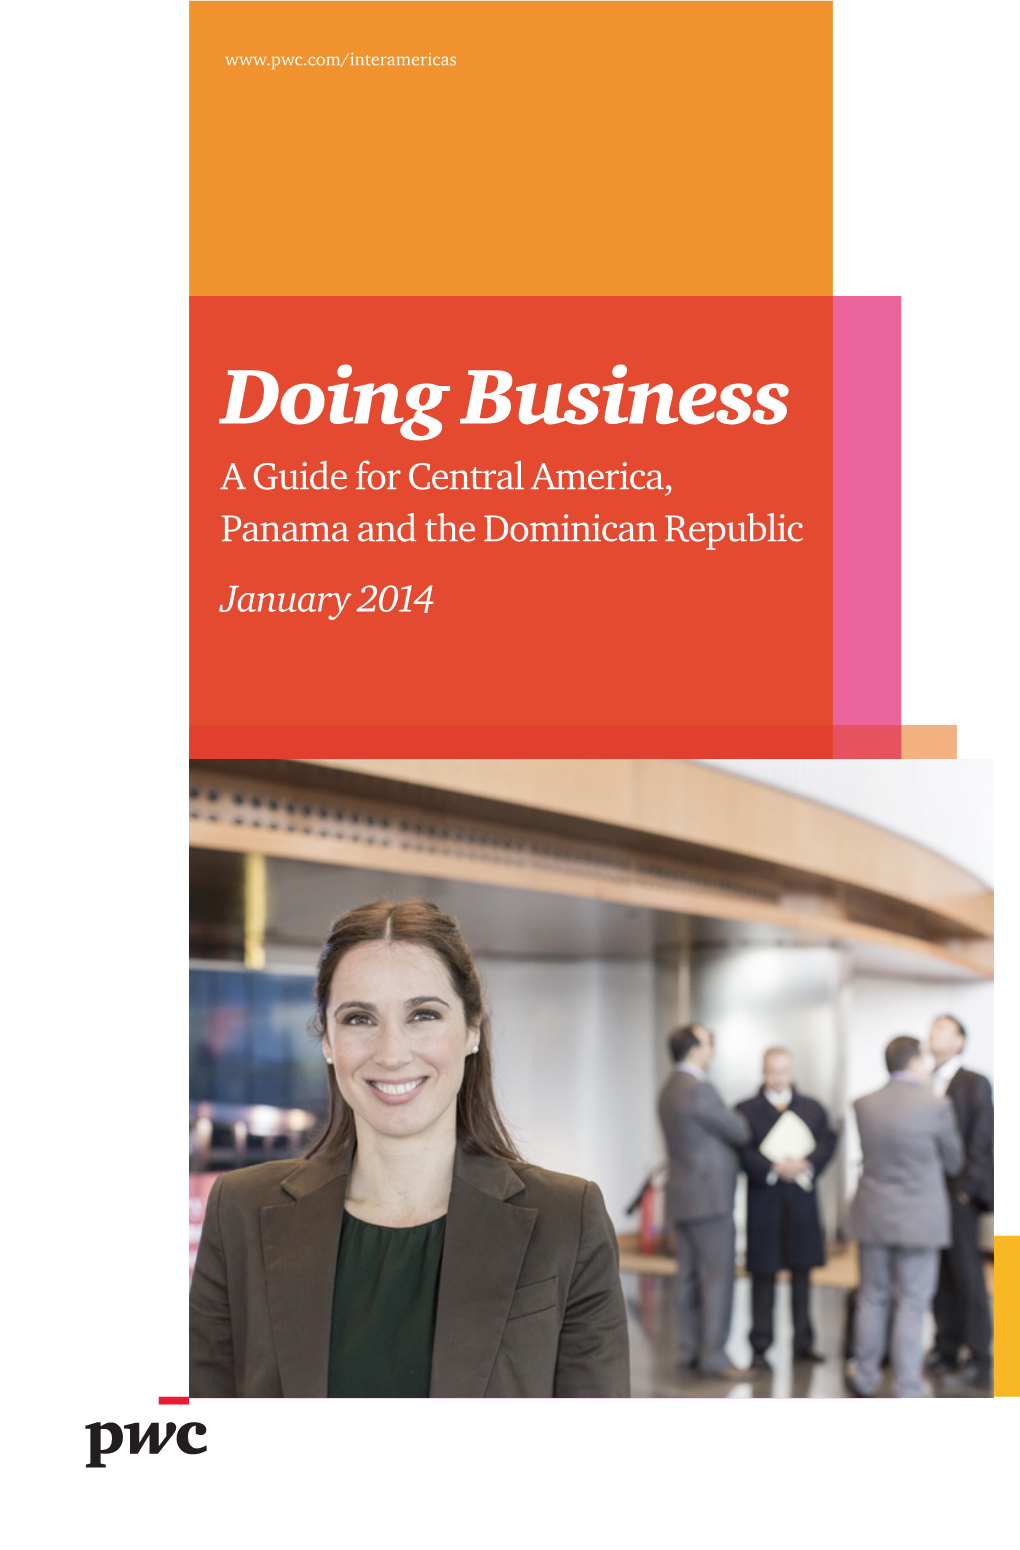 Doing Business a Guide for Central America, Panama and the Dominican Republic January 2014